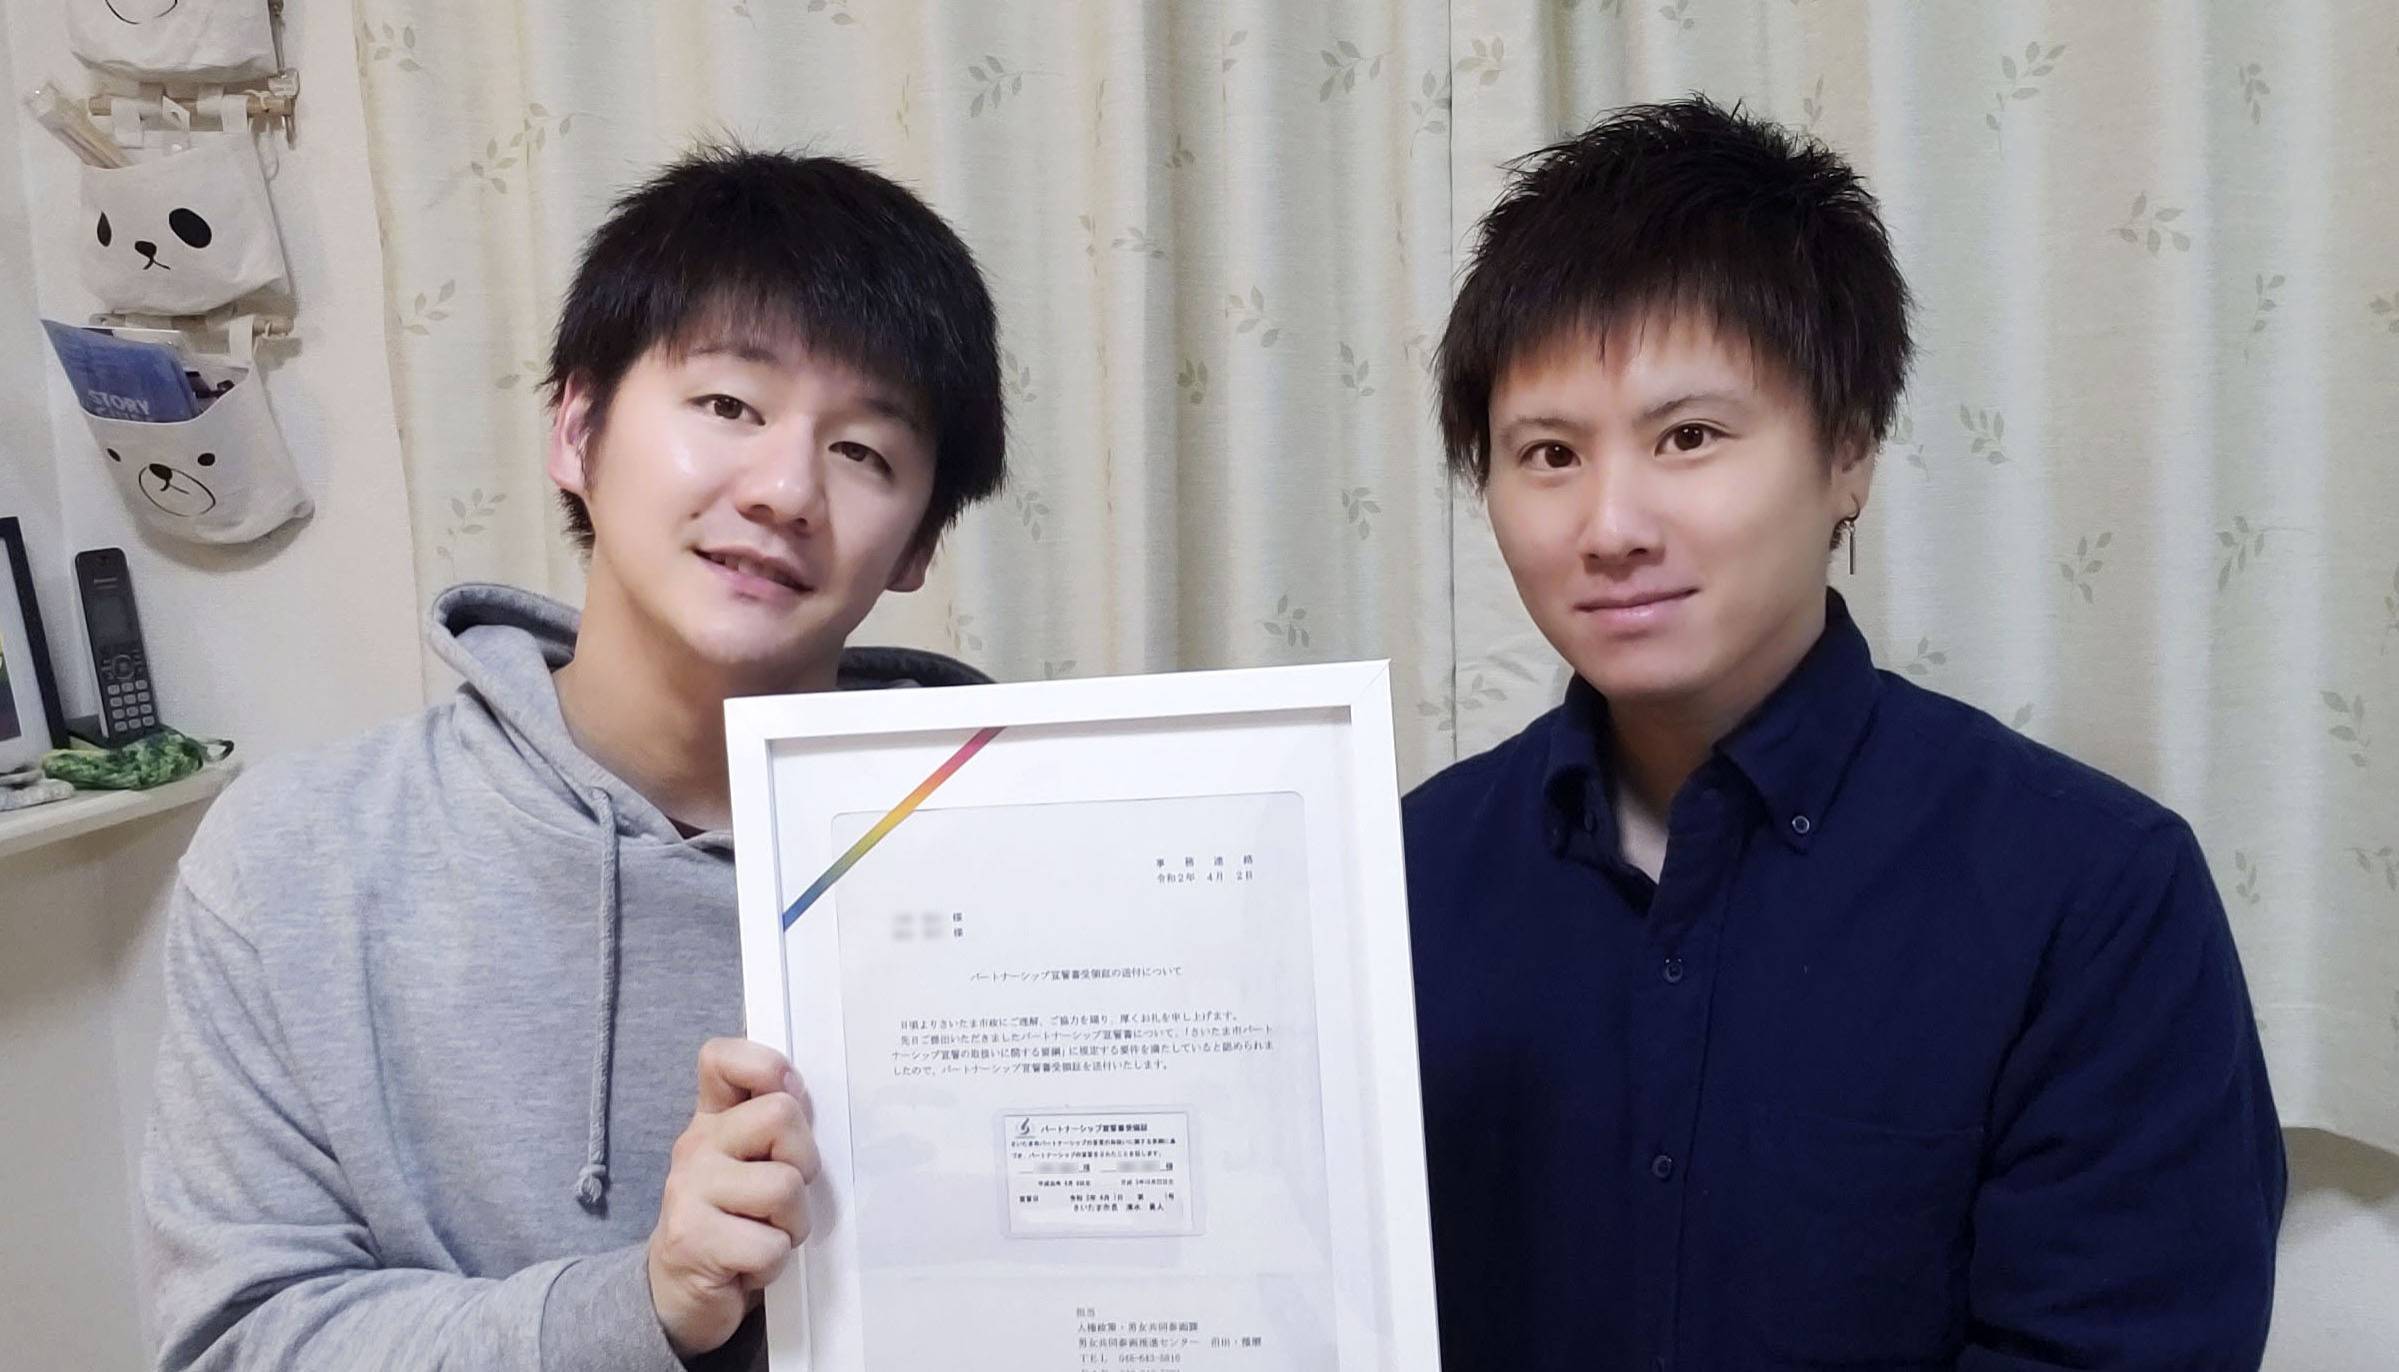 Kohei Inagaki (right) and his partner show their partnership certificate issued by the city of Saitama. | KYODO